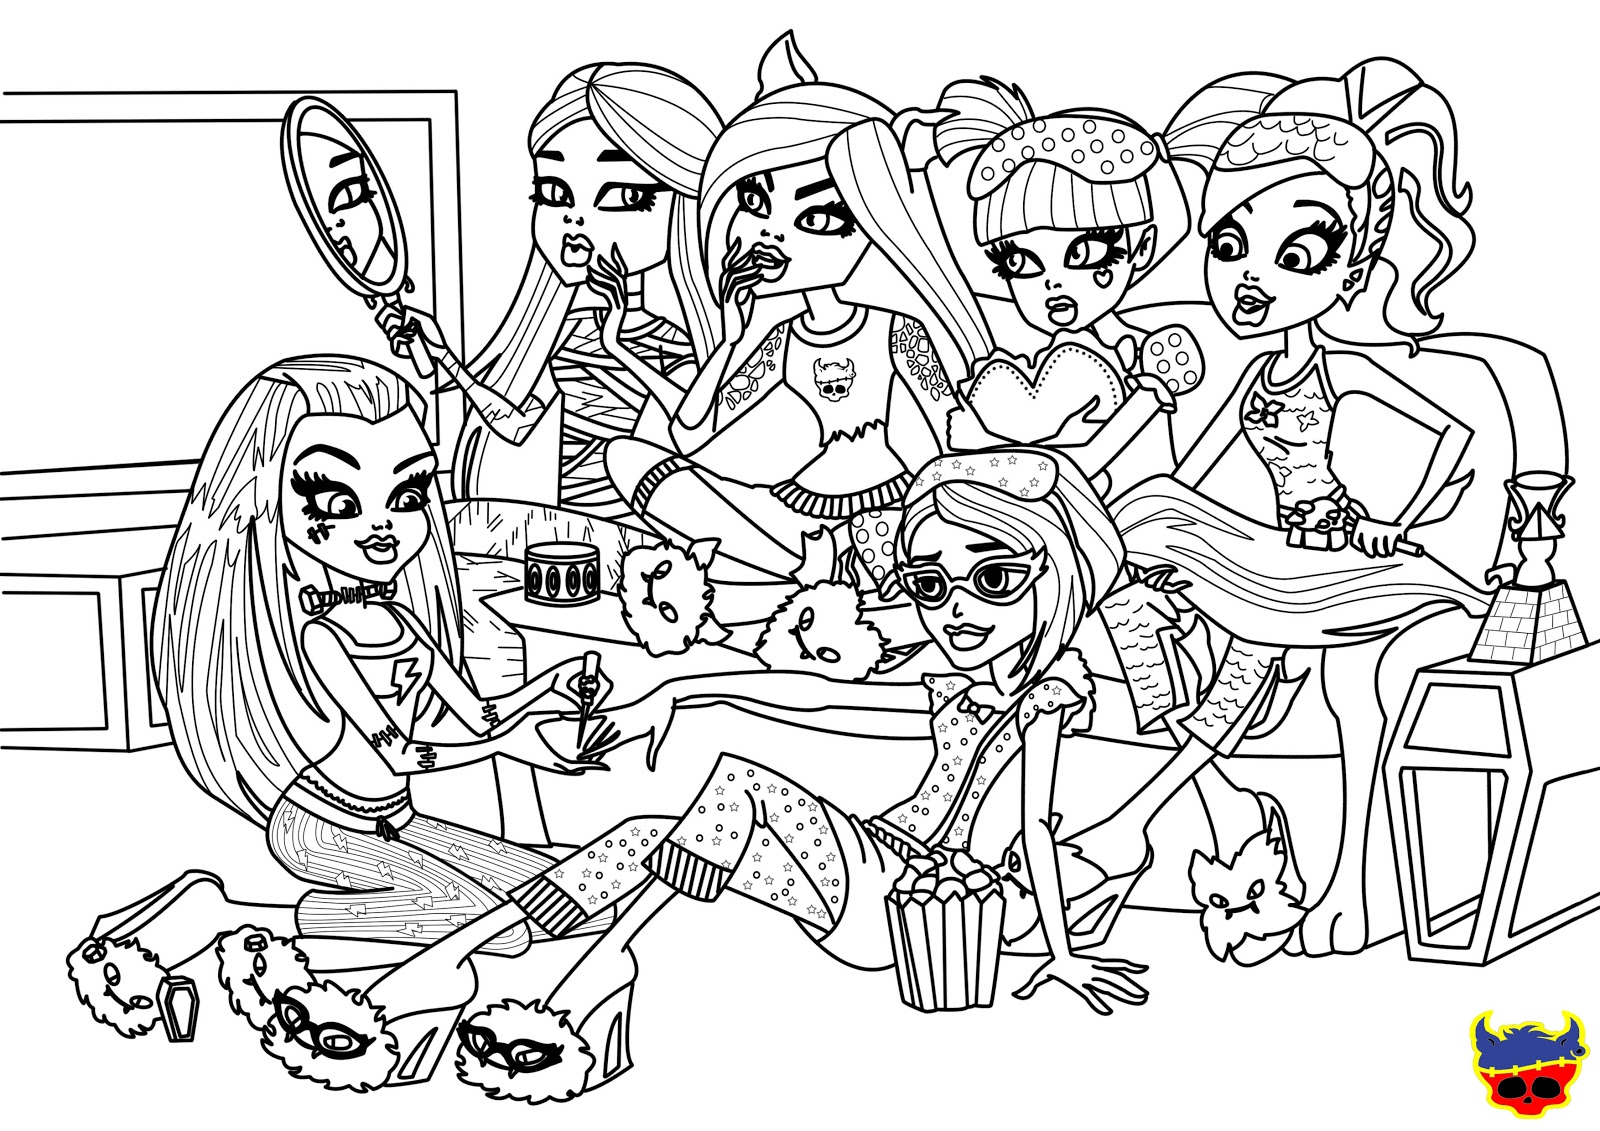 Lots of Monster High characters